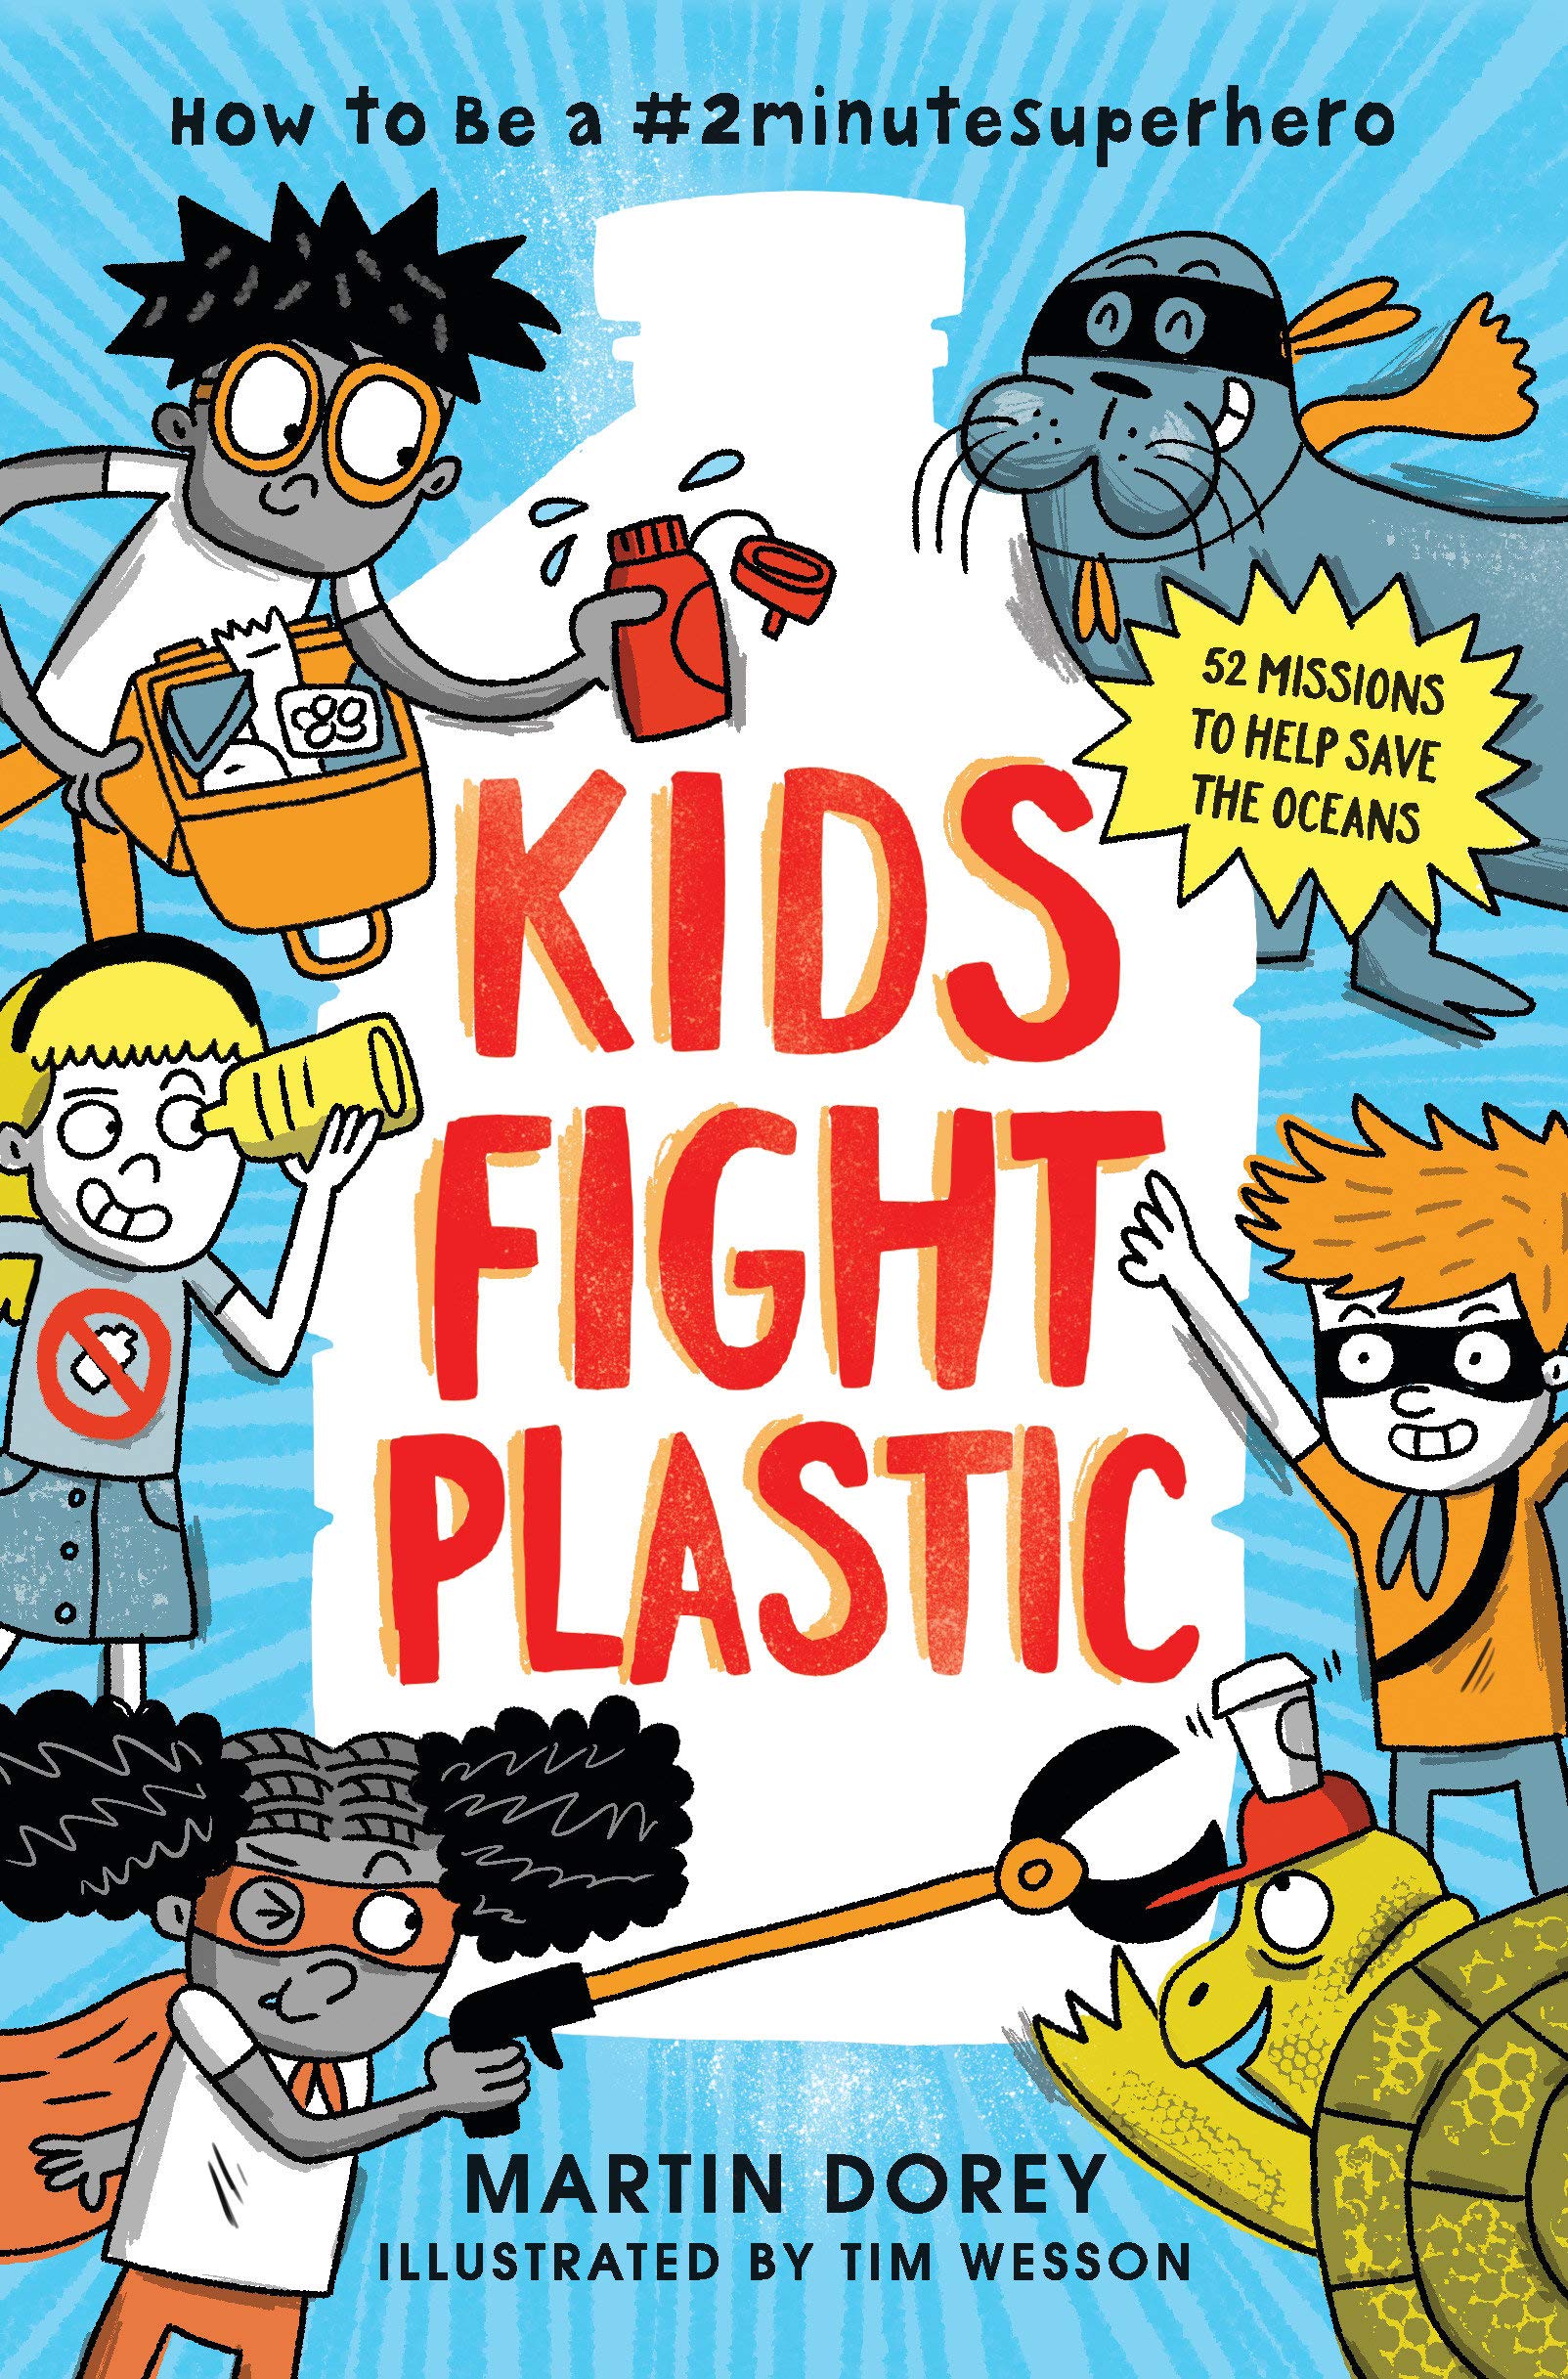 Kids Fight Plastic : How to be a #2minutesuperhero